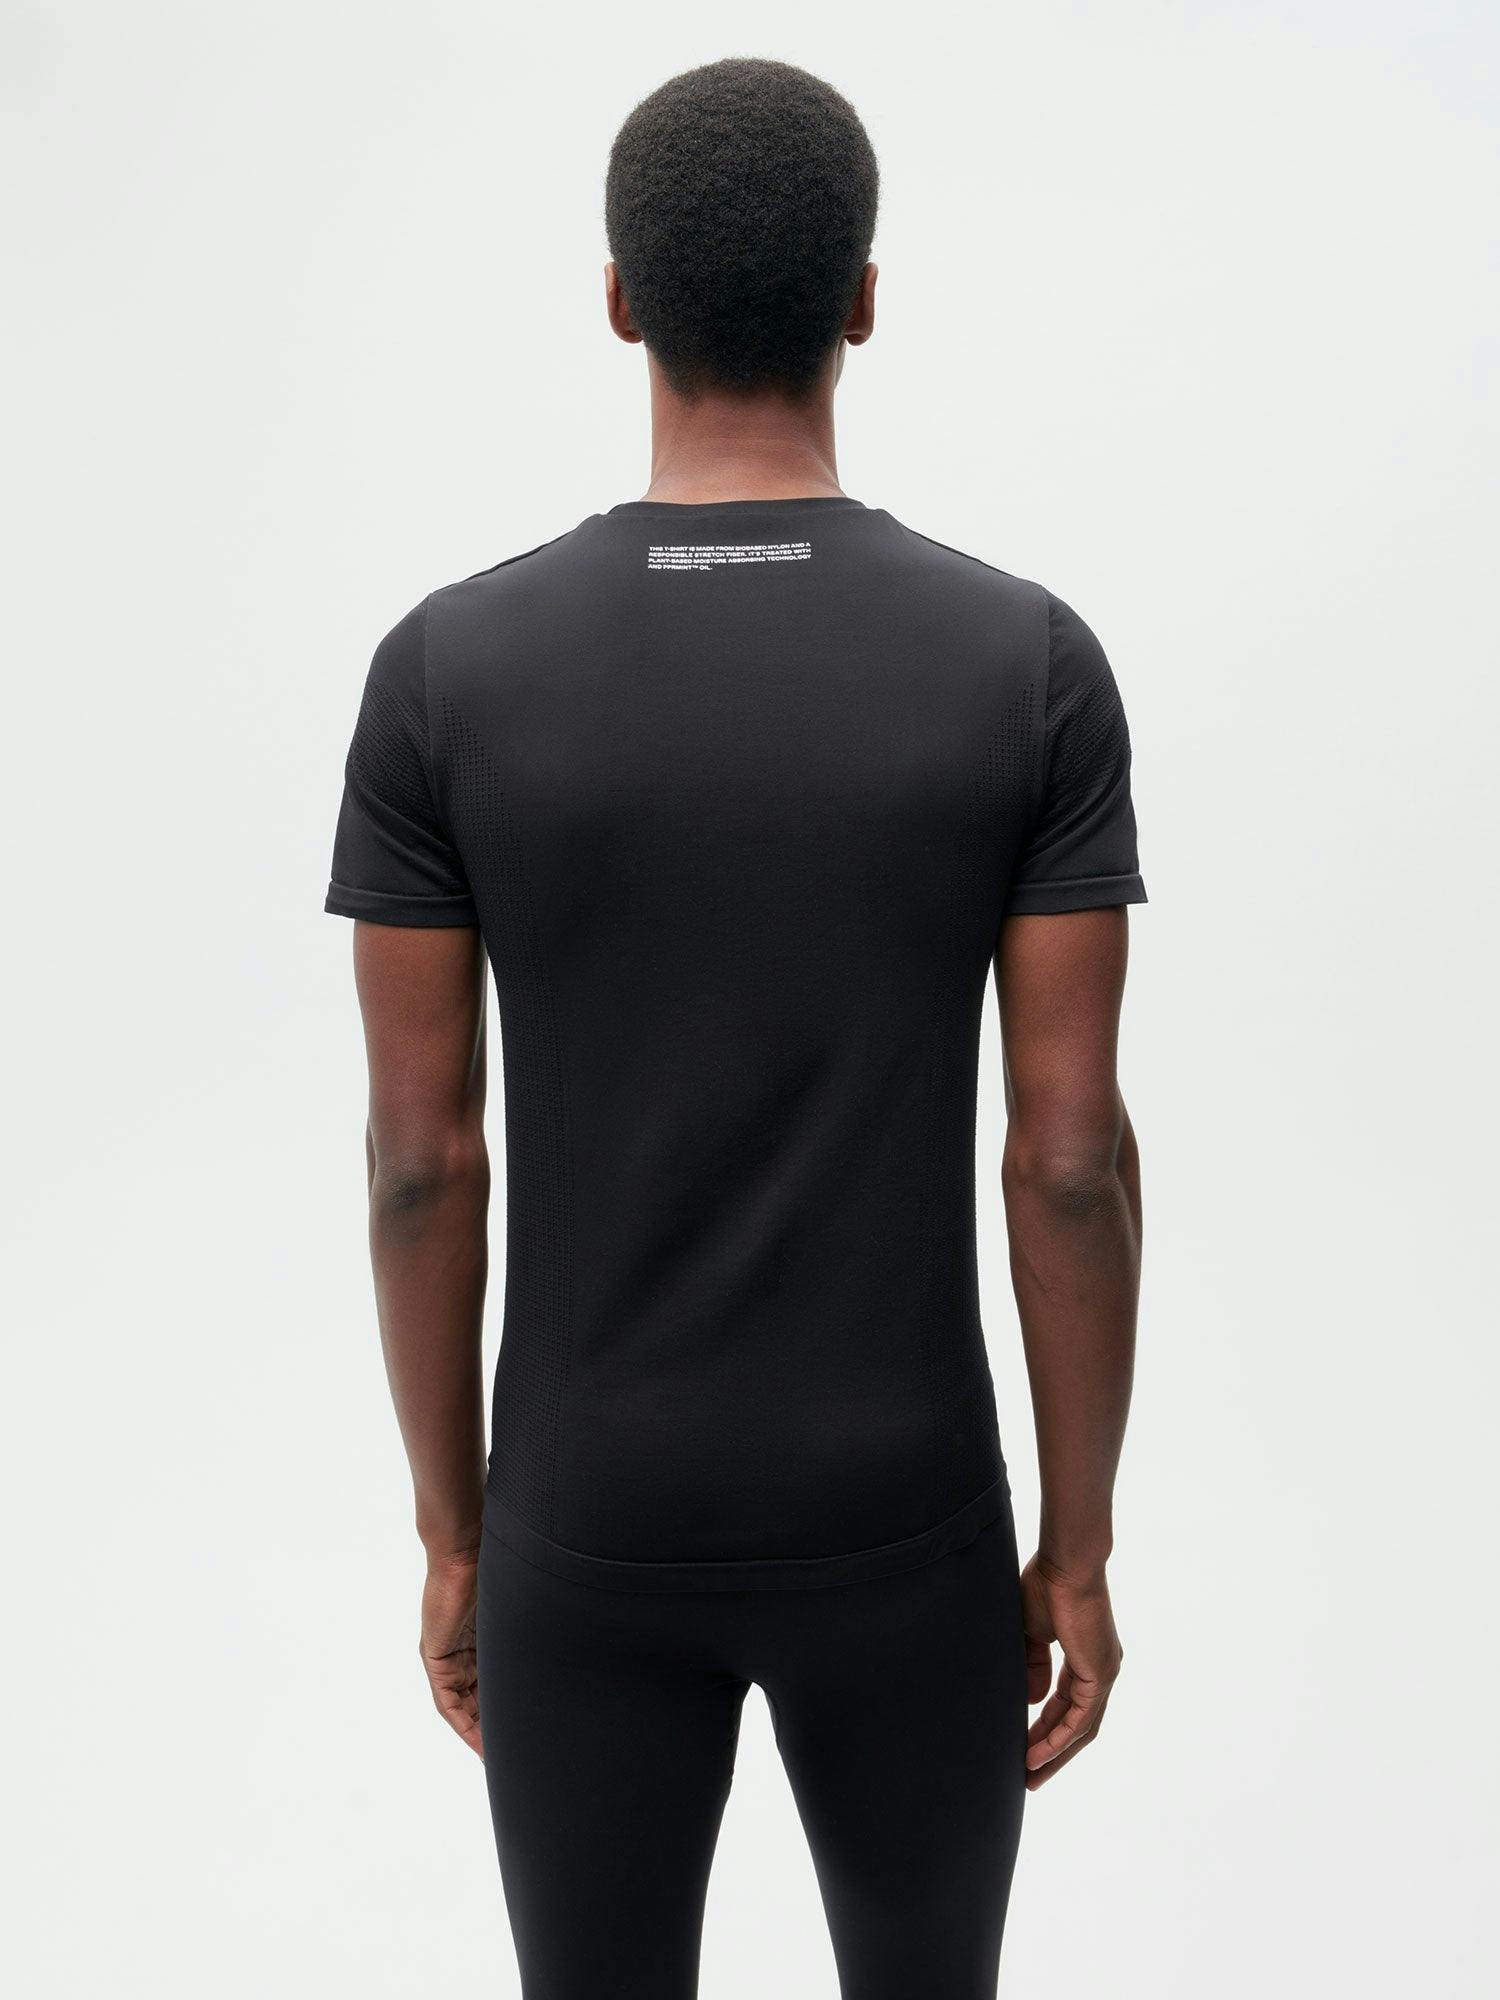 https://cdn.shopify.com/s/files/1/0035/1309/0115/products/Activewear-Mens-Fitted-T-Shirt-Black-Male-2.jpg?v=1662476186